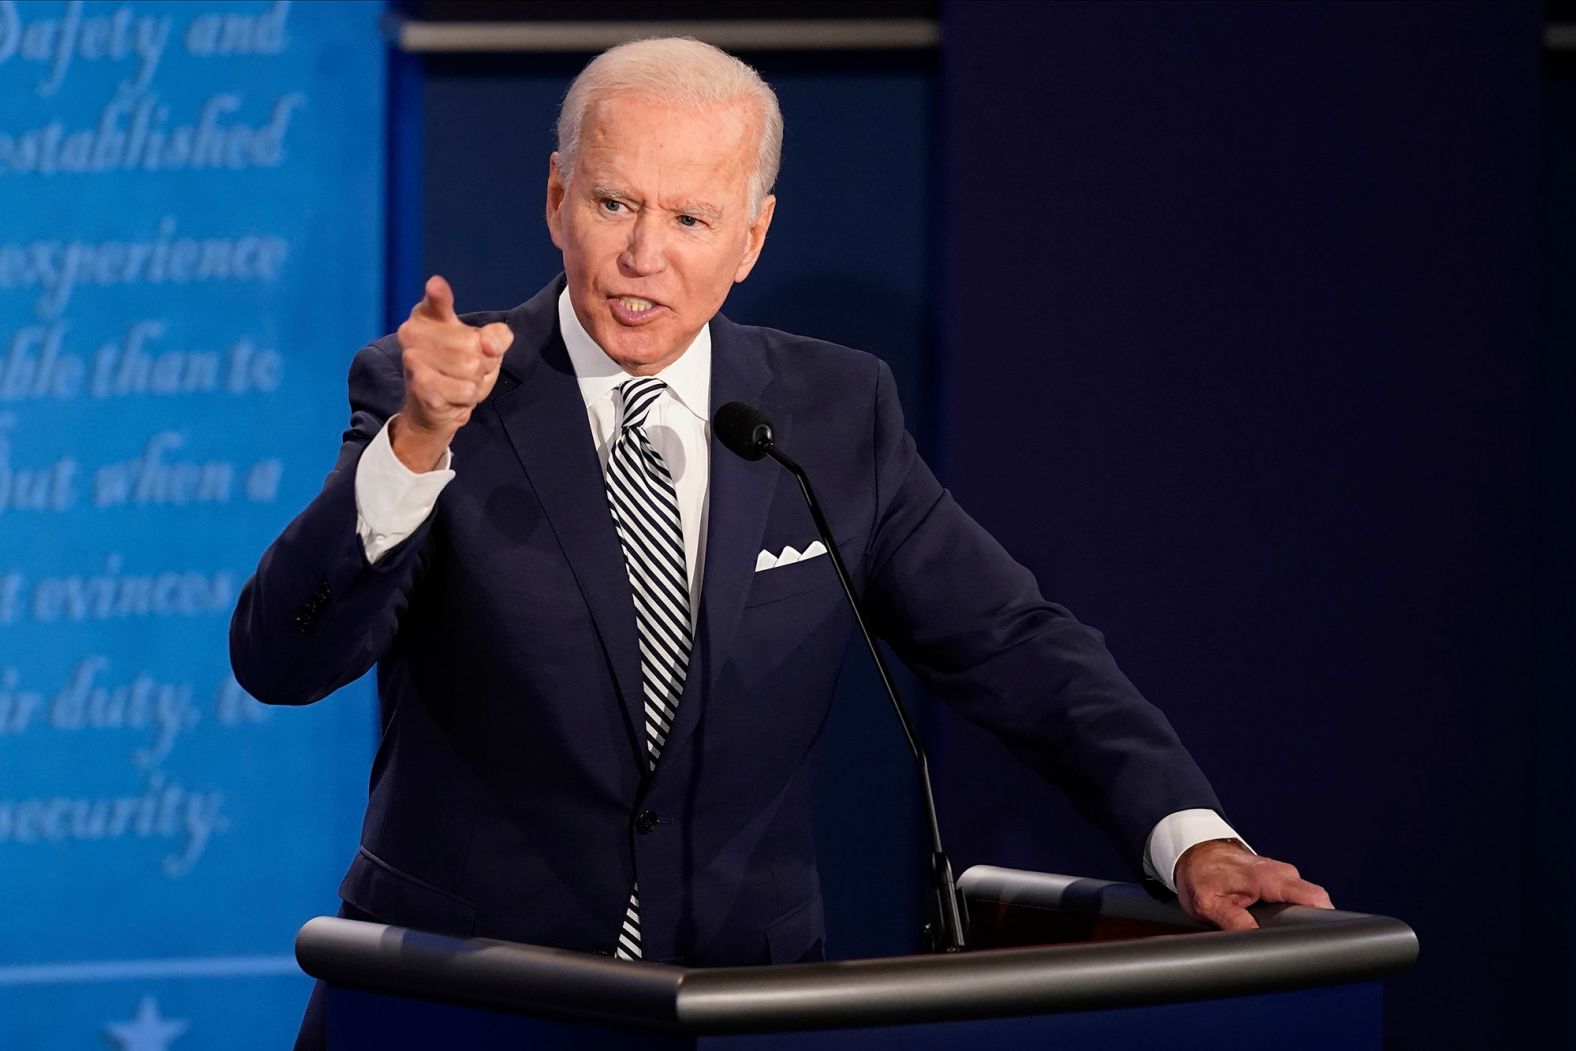 Biden tries to make a point during the debate. His frustrations with Trump were evident throughout the debate.